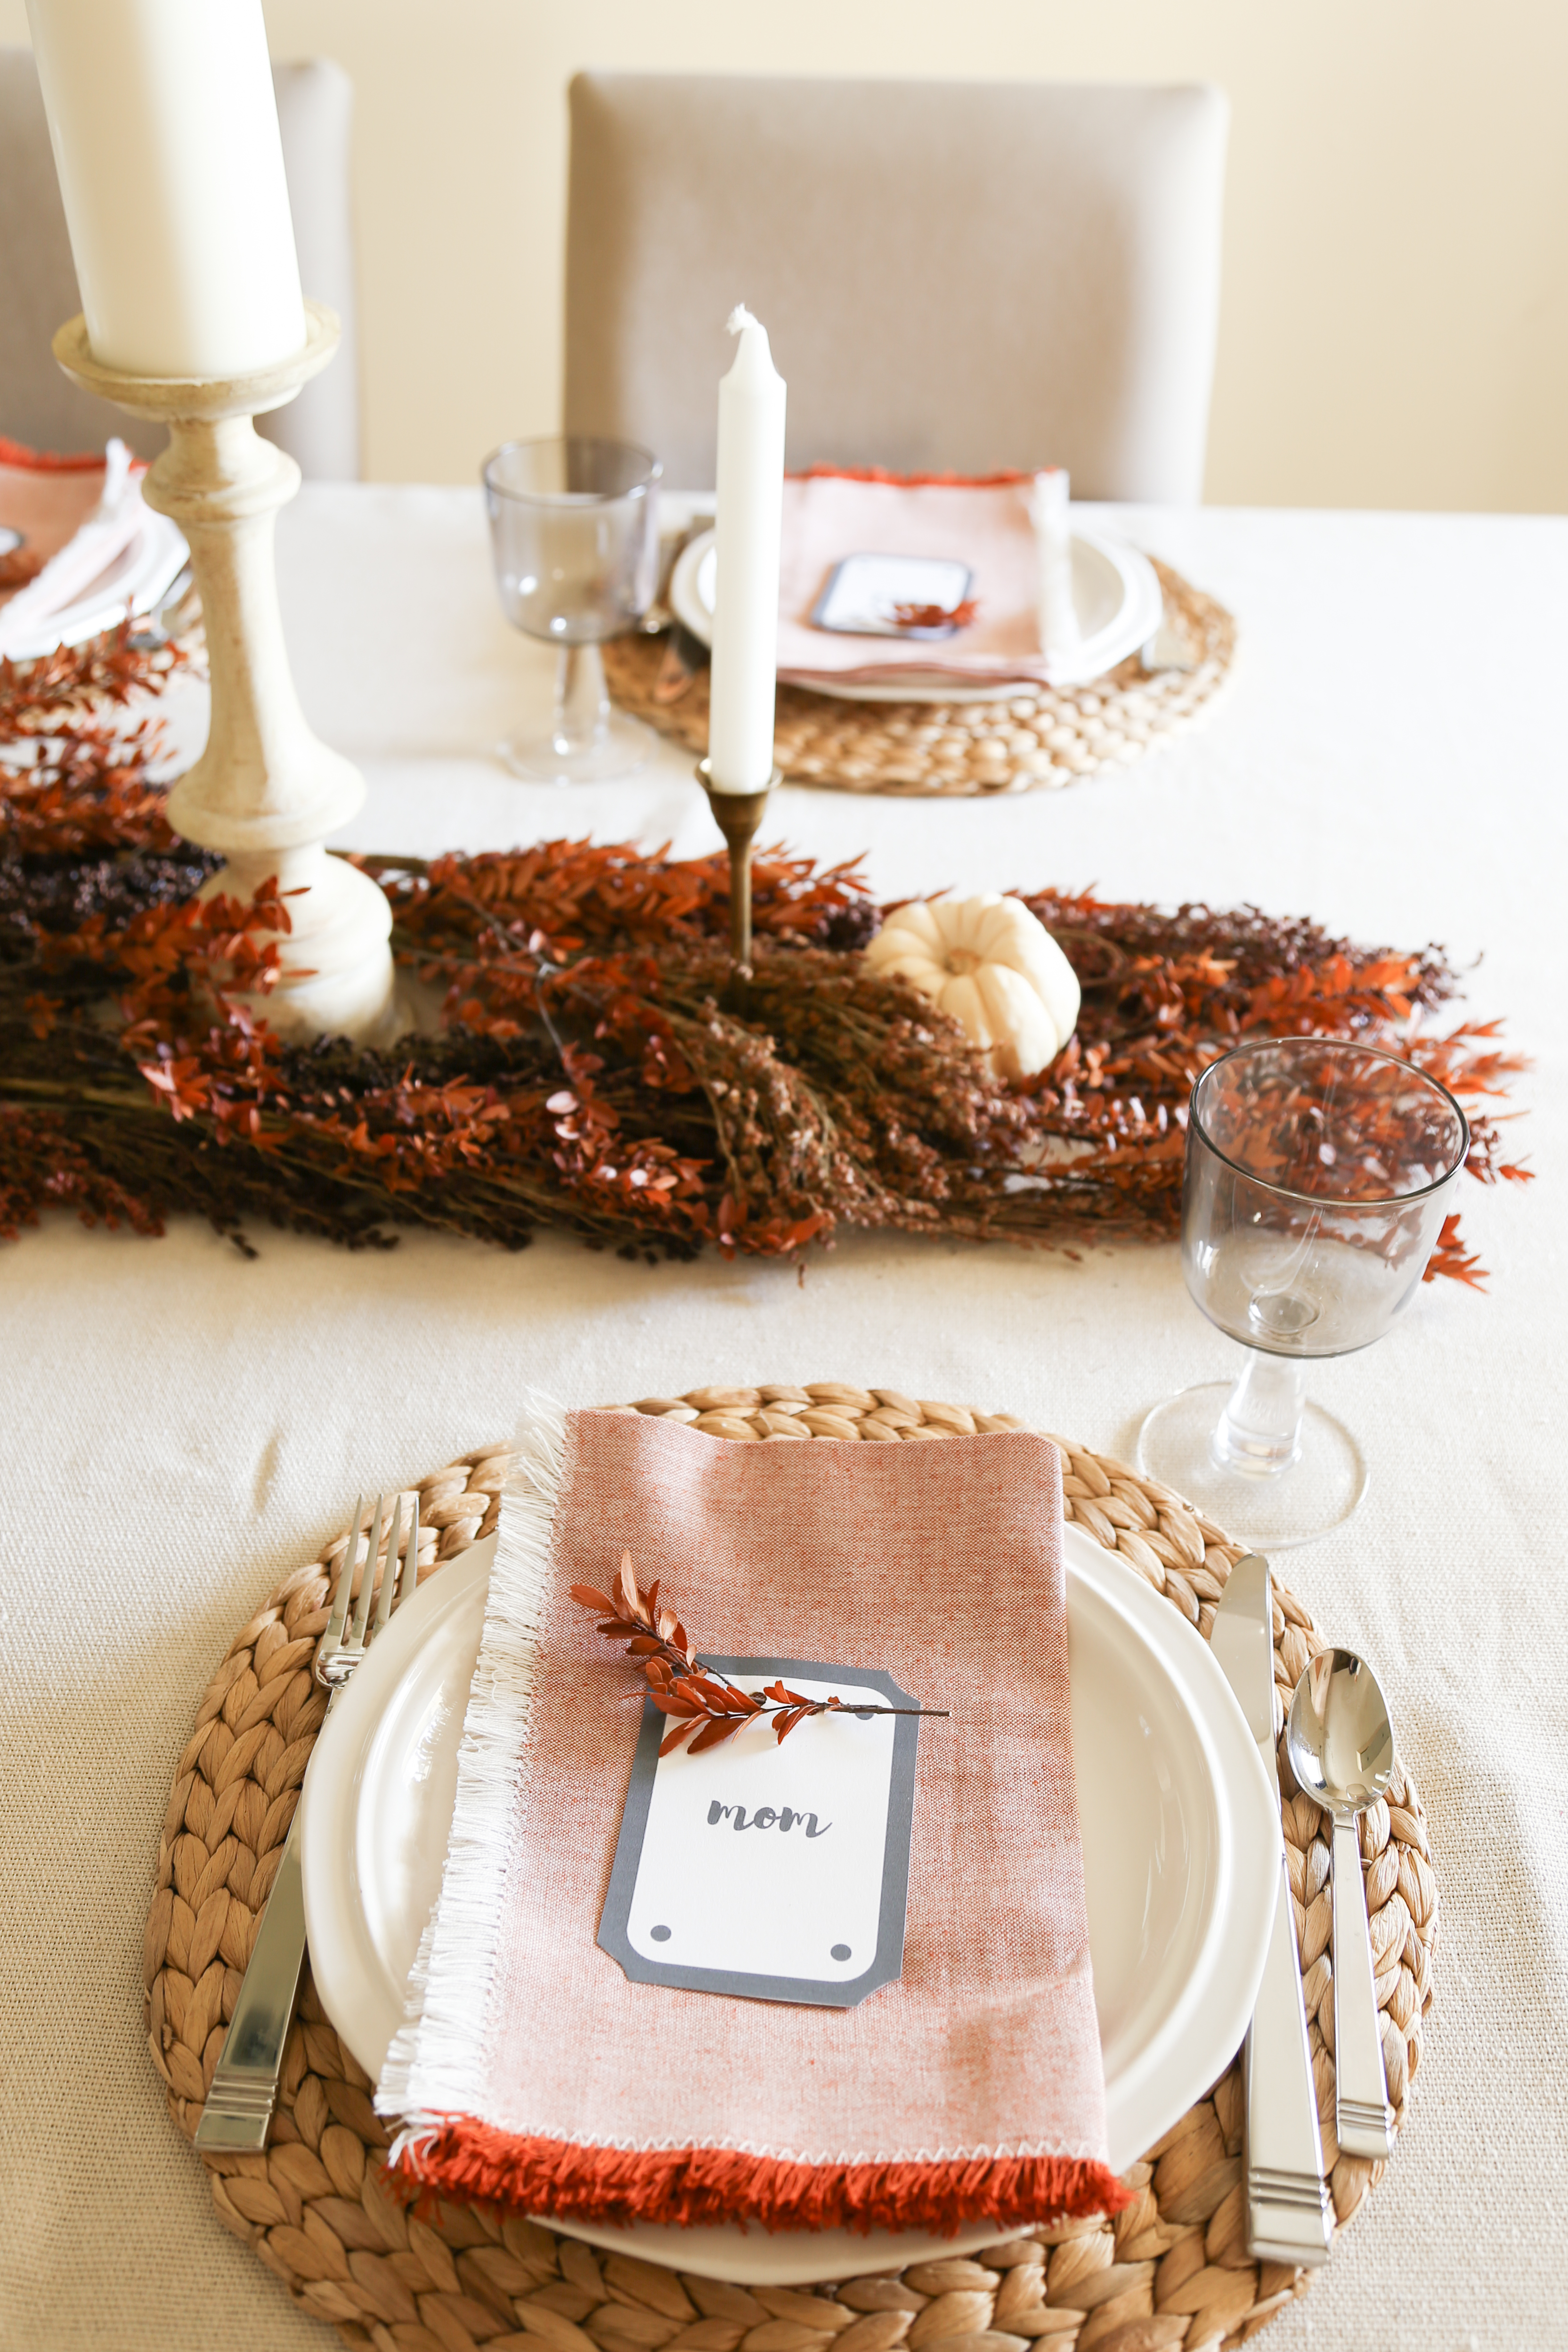 Decorate for thanksgiving using dried stems as a simple and elegant table runner.